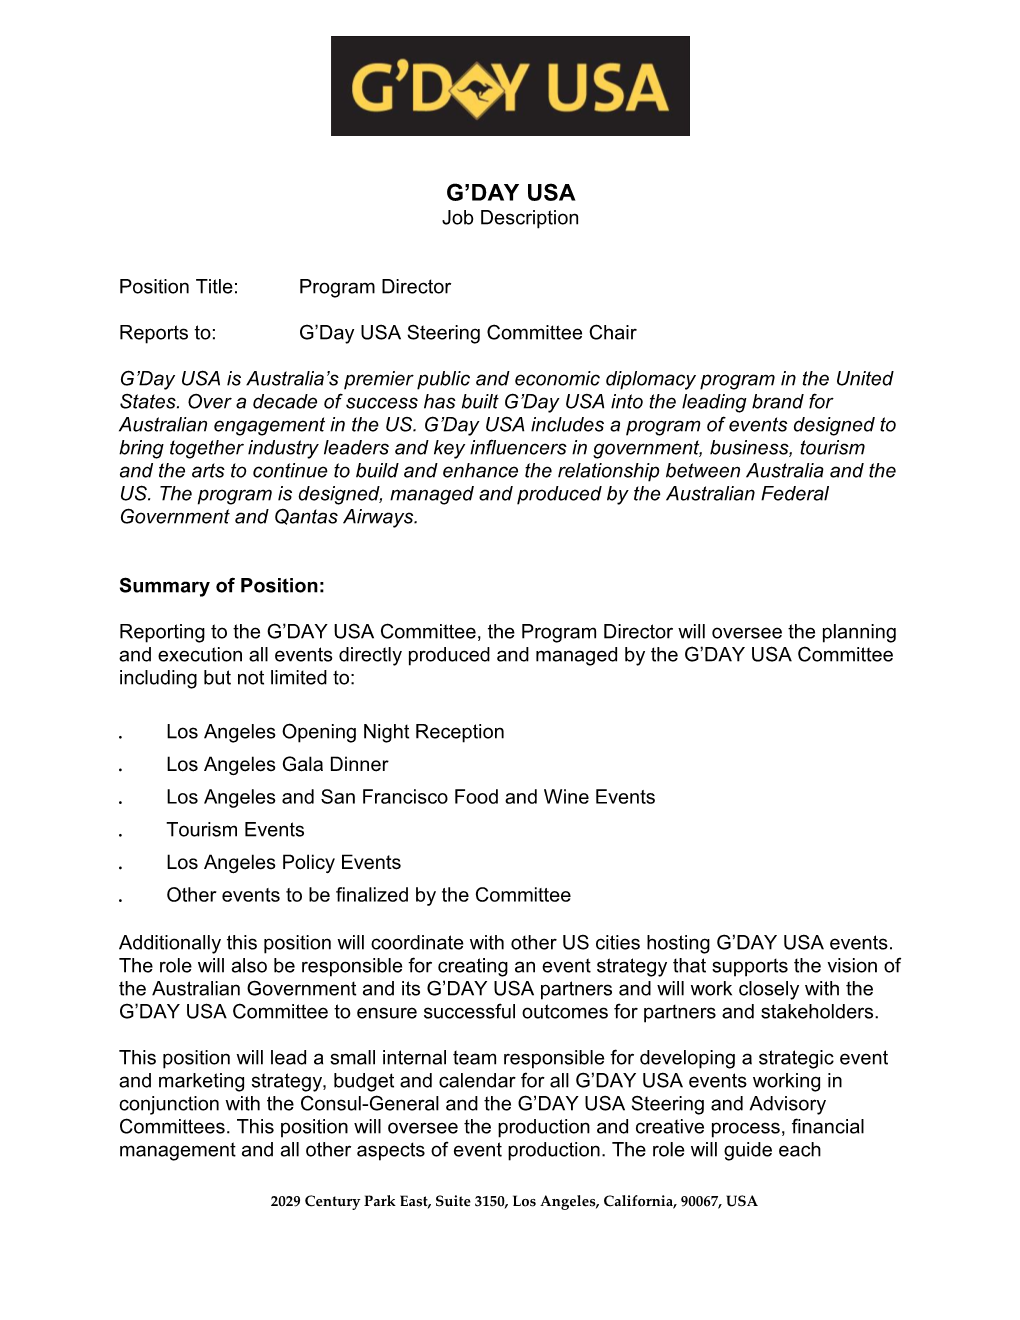 Reports To:G Day USA Steering Committee Chair